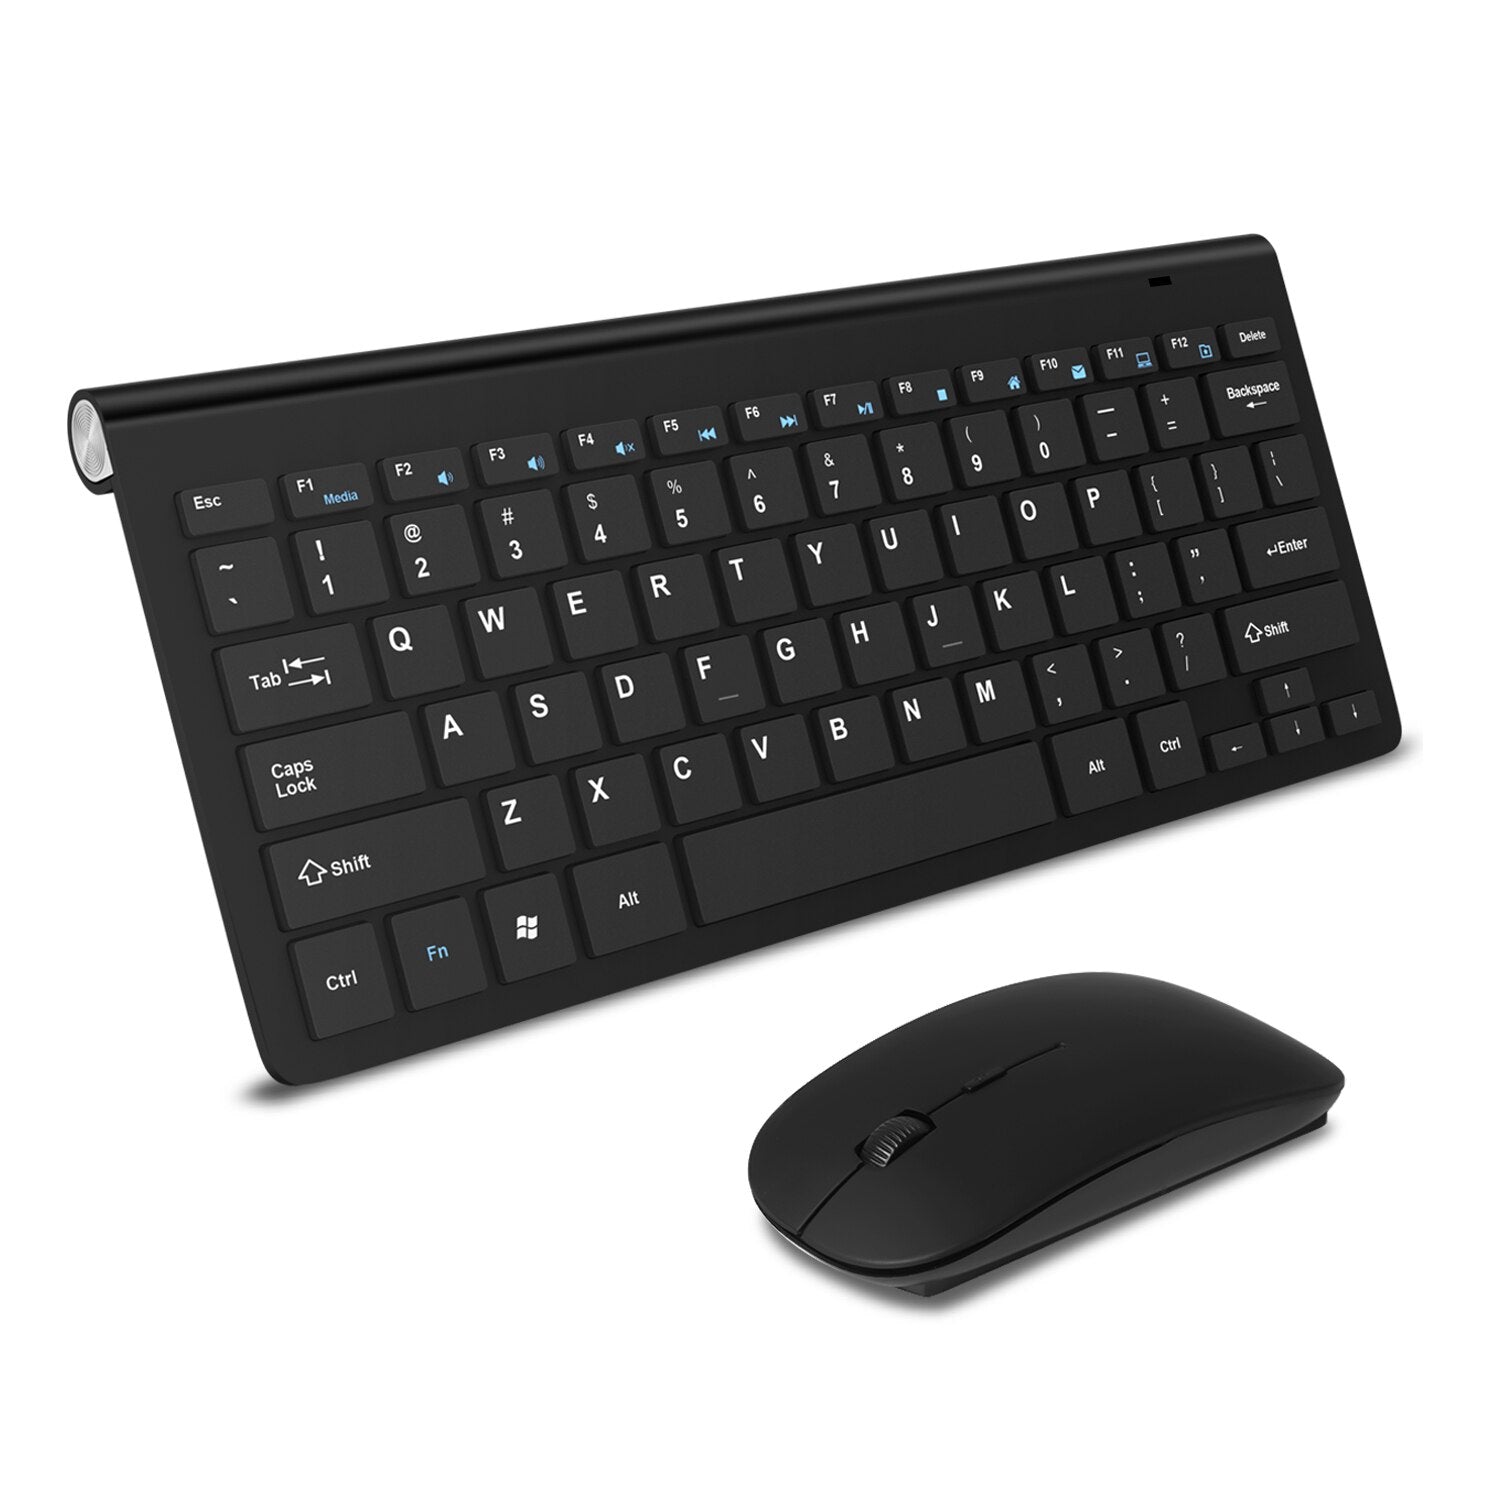 Wireless Keyboard and Mouse 2.4G USB Mini keyboard Mouse Combos Noiseless Ergonomic Keyboard with mouse set For PC Laptop TV.